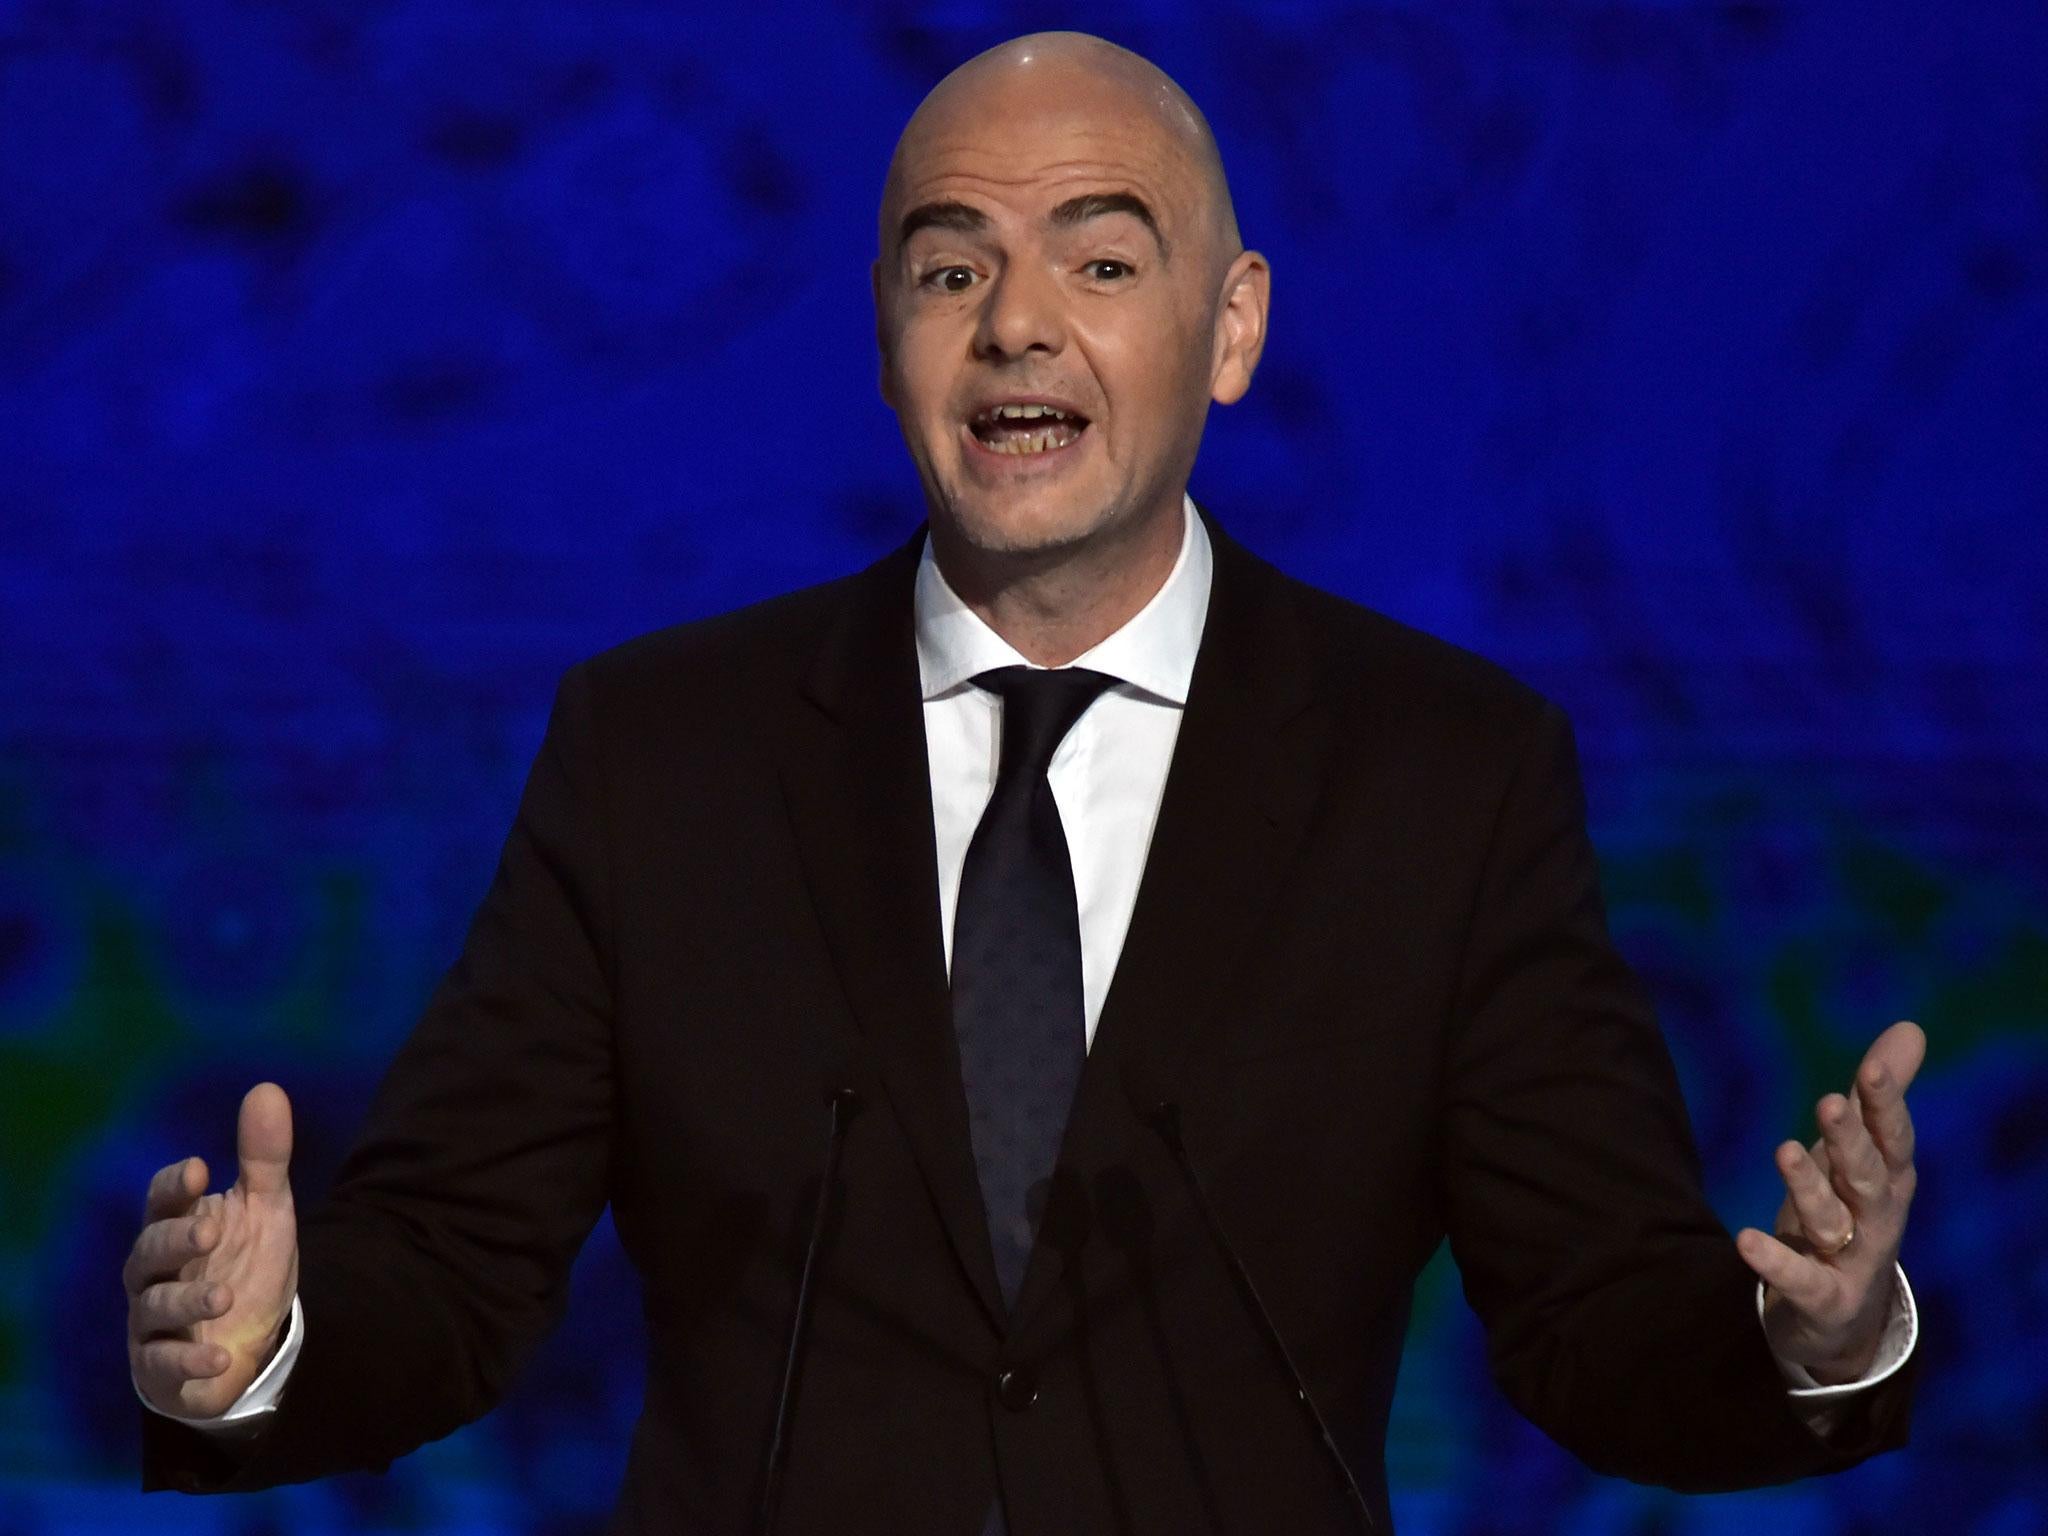 Fifa president Gianni Infantino seems determined to make his mark - by any means possible